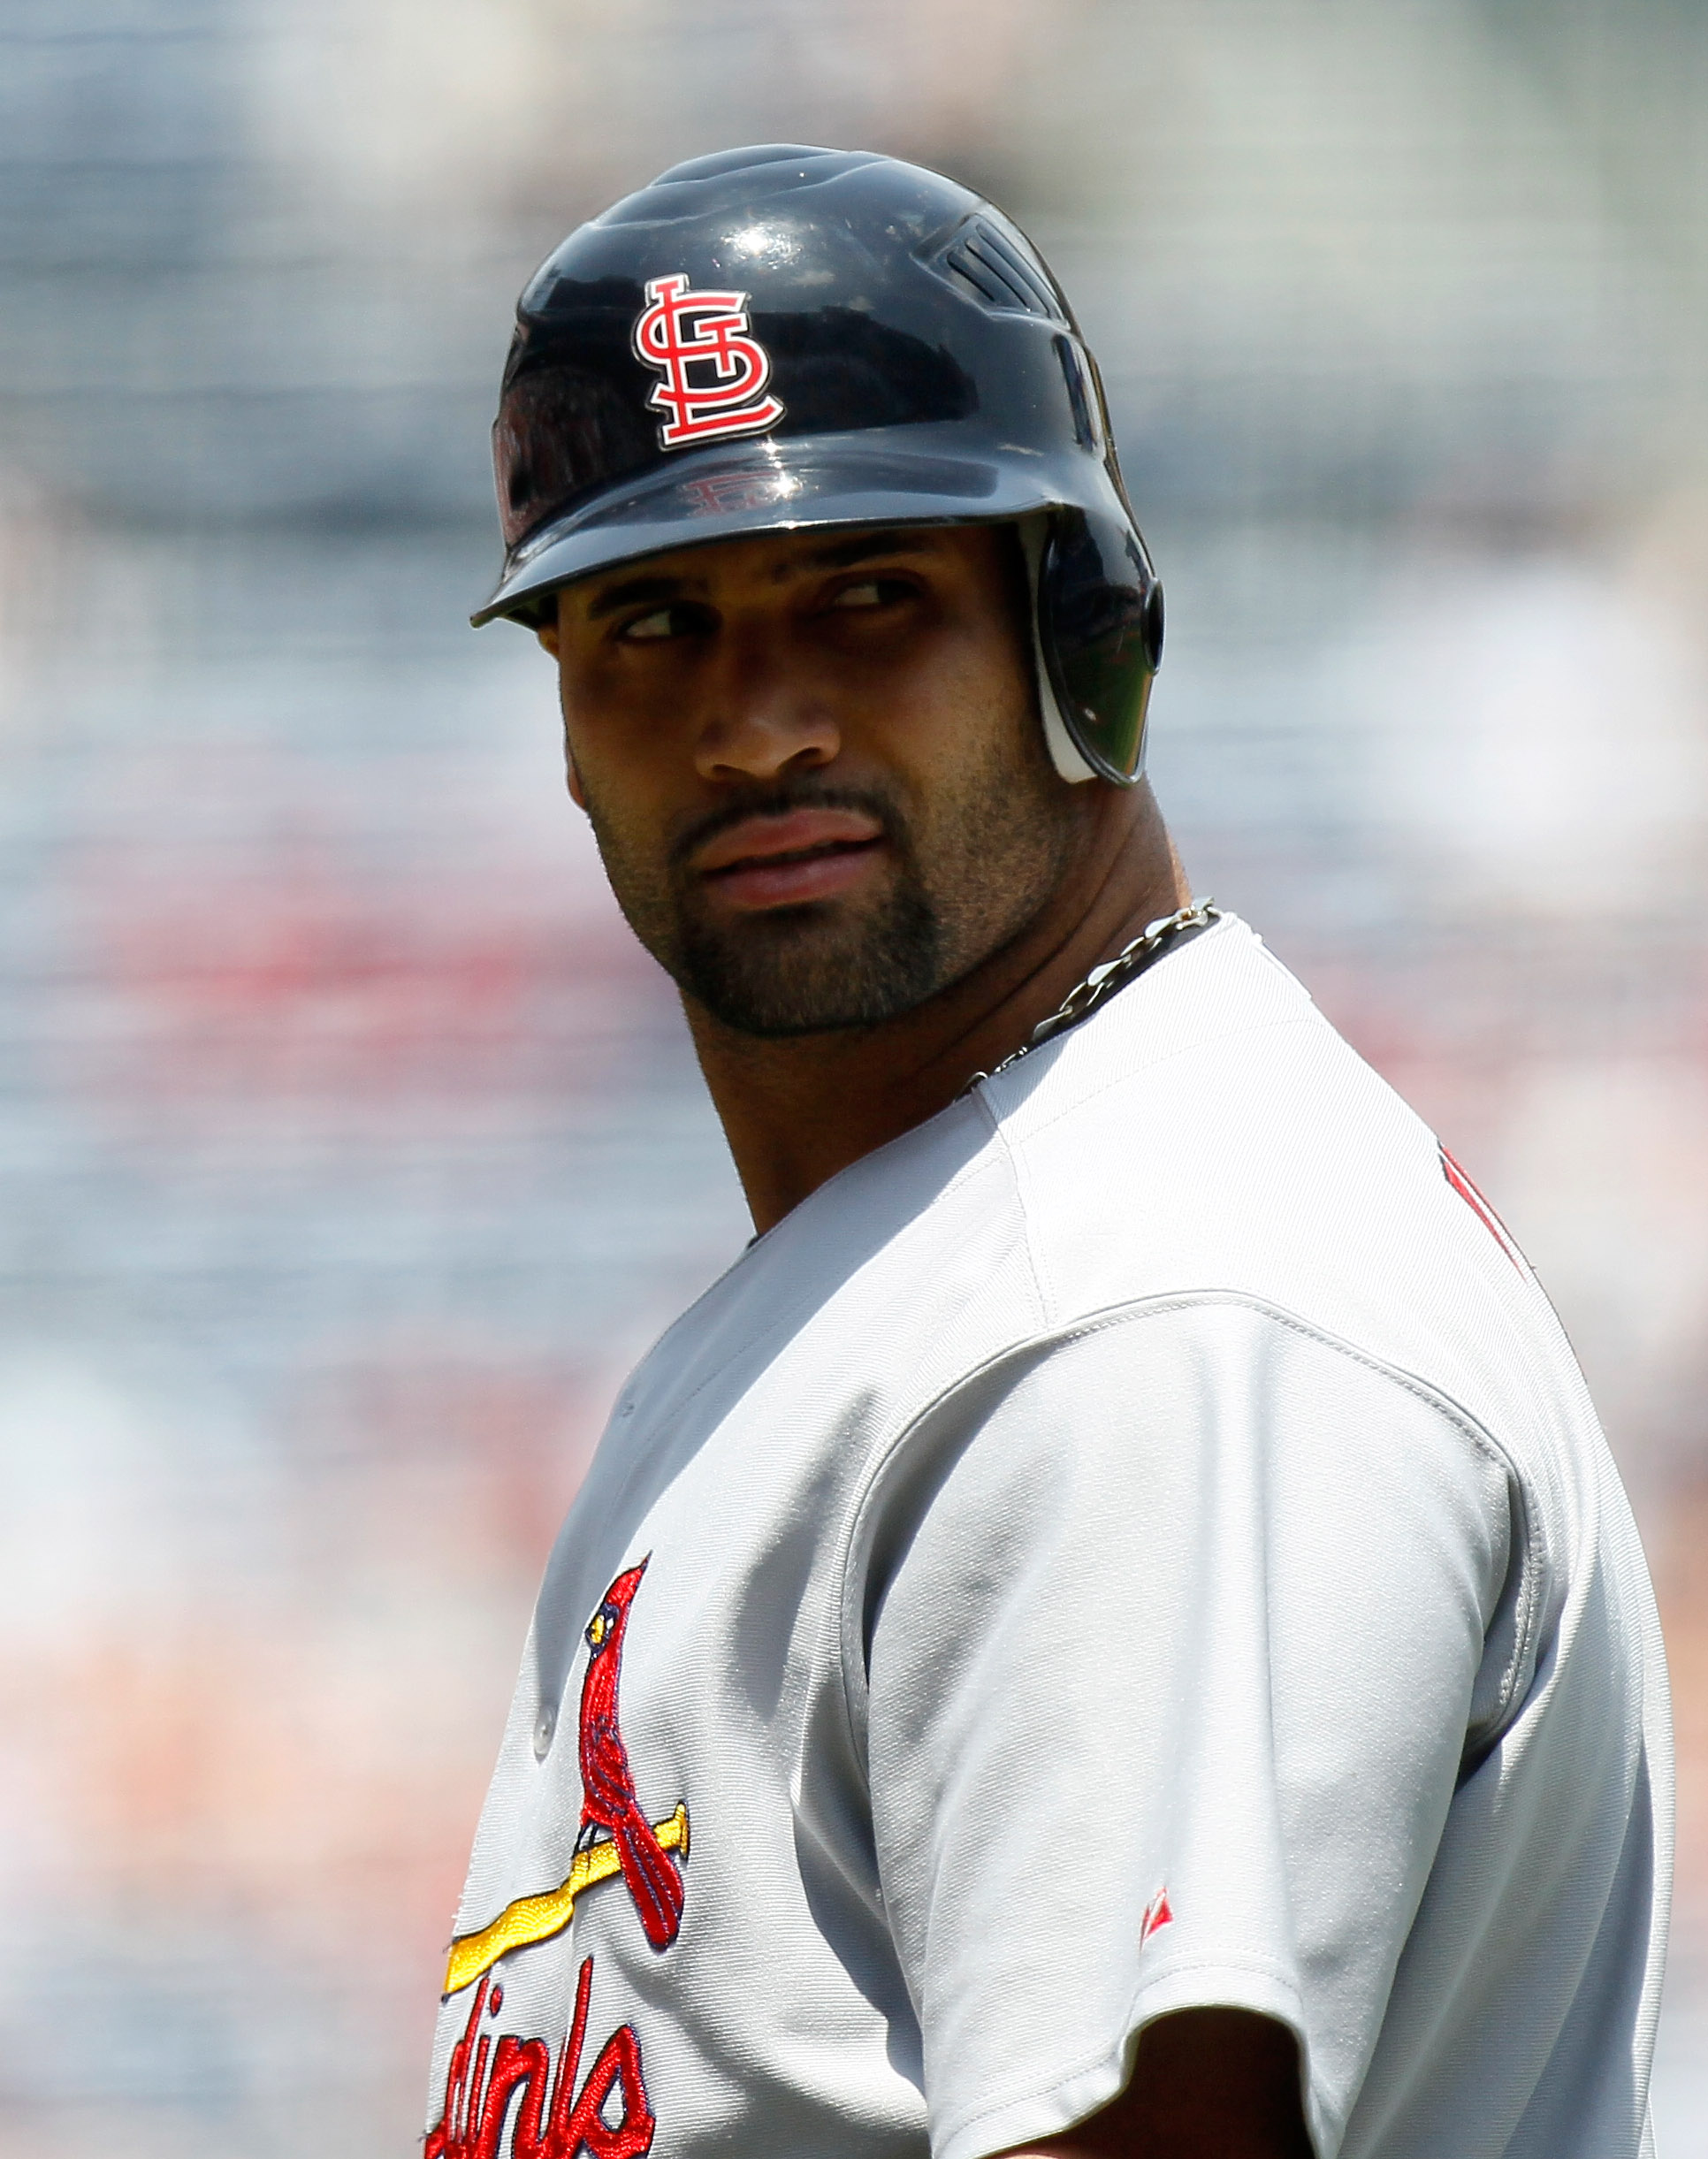 Gammons: In 2001, Mark McGwire looked at a young Albert Pujols